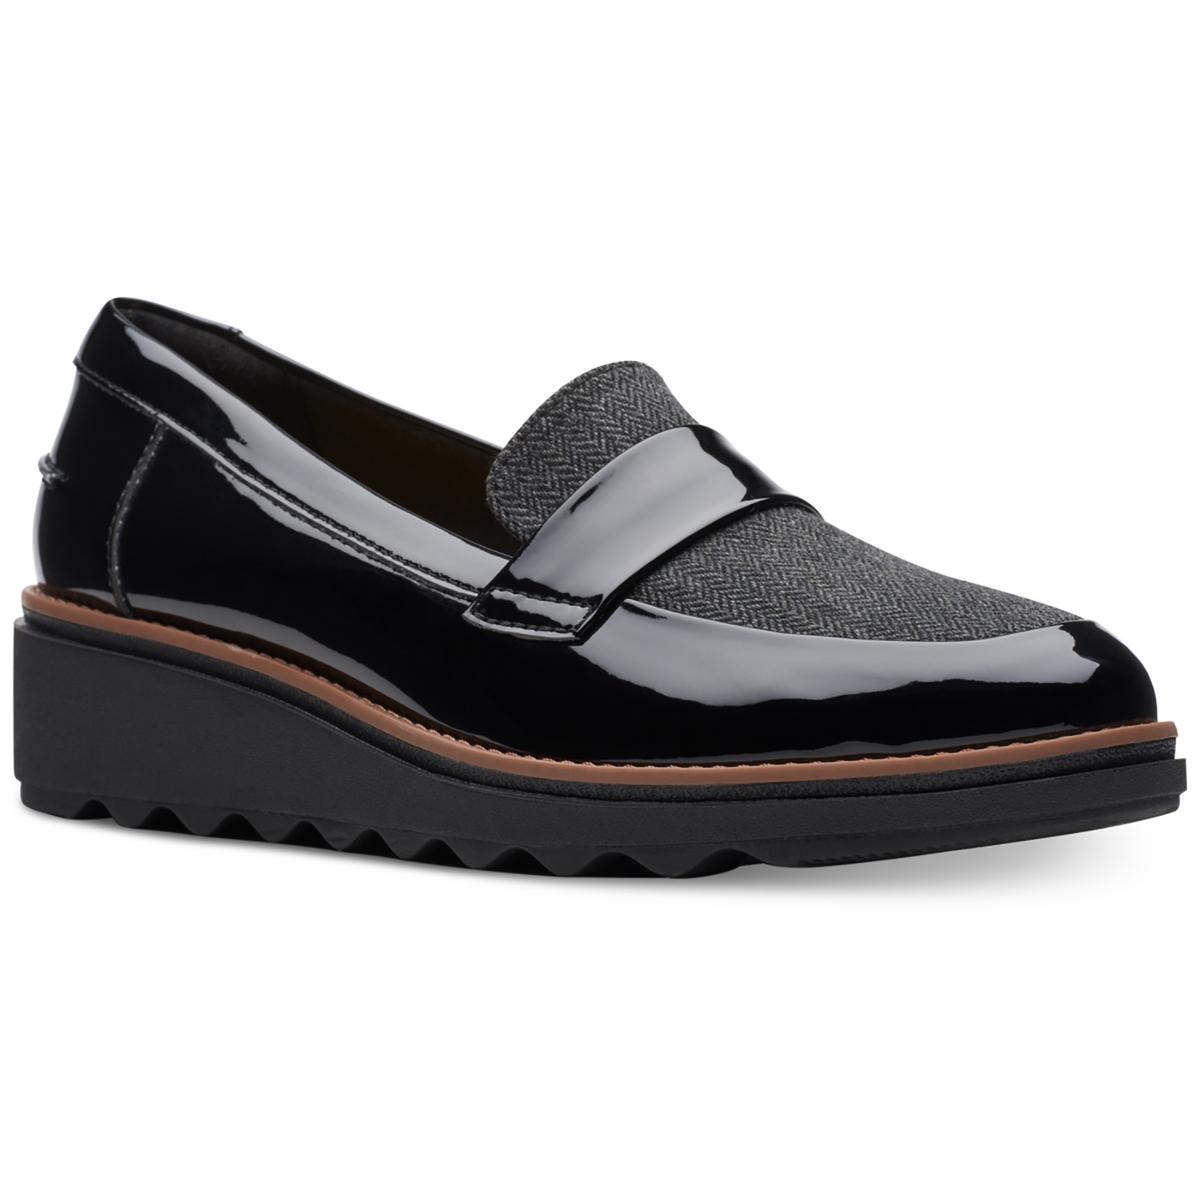 Clarks Sharon Gracie Womens Loafers